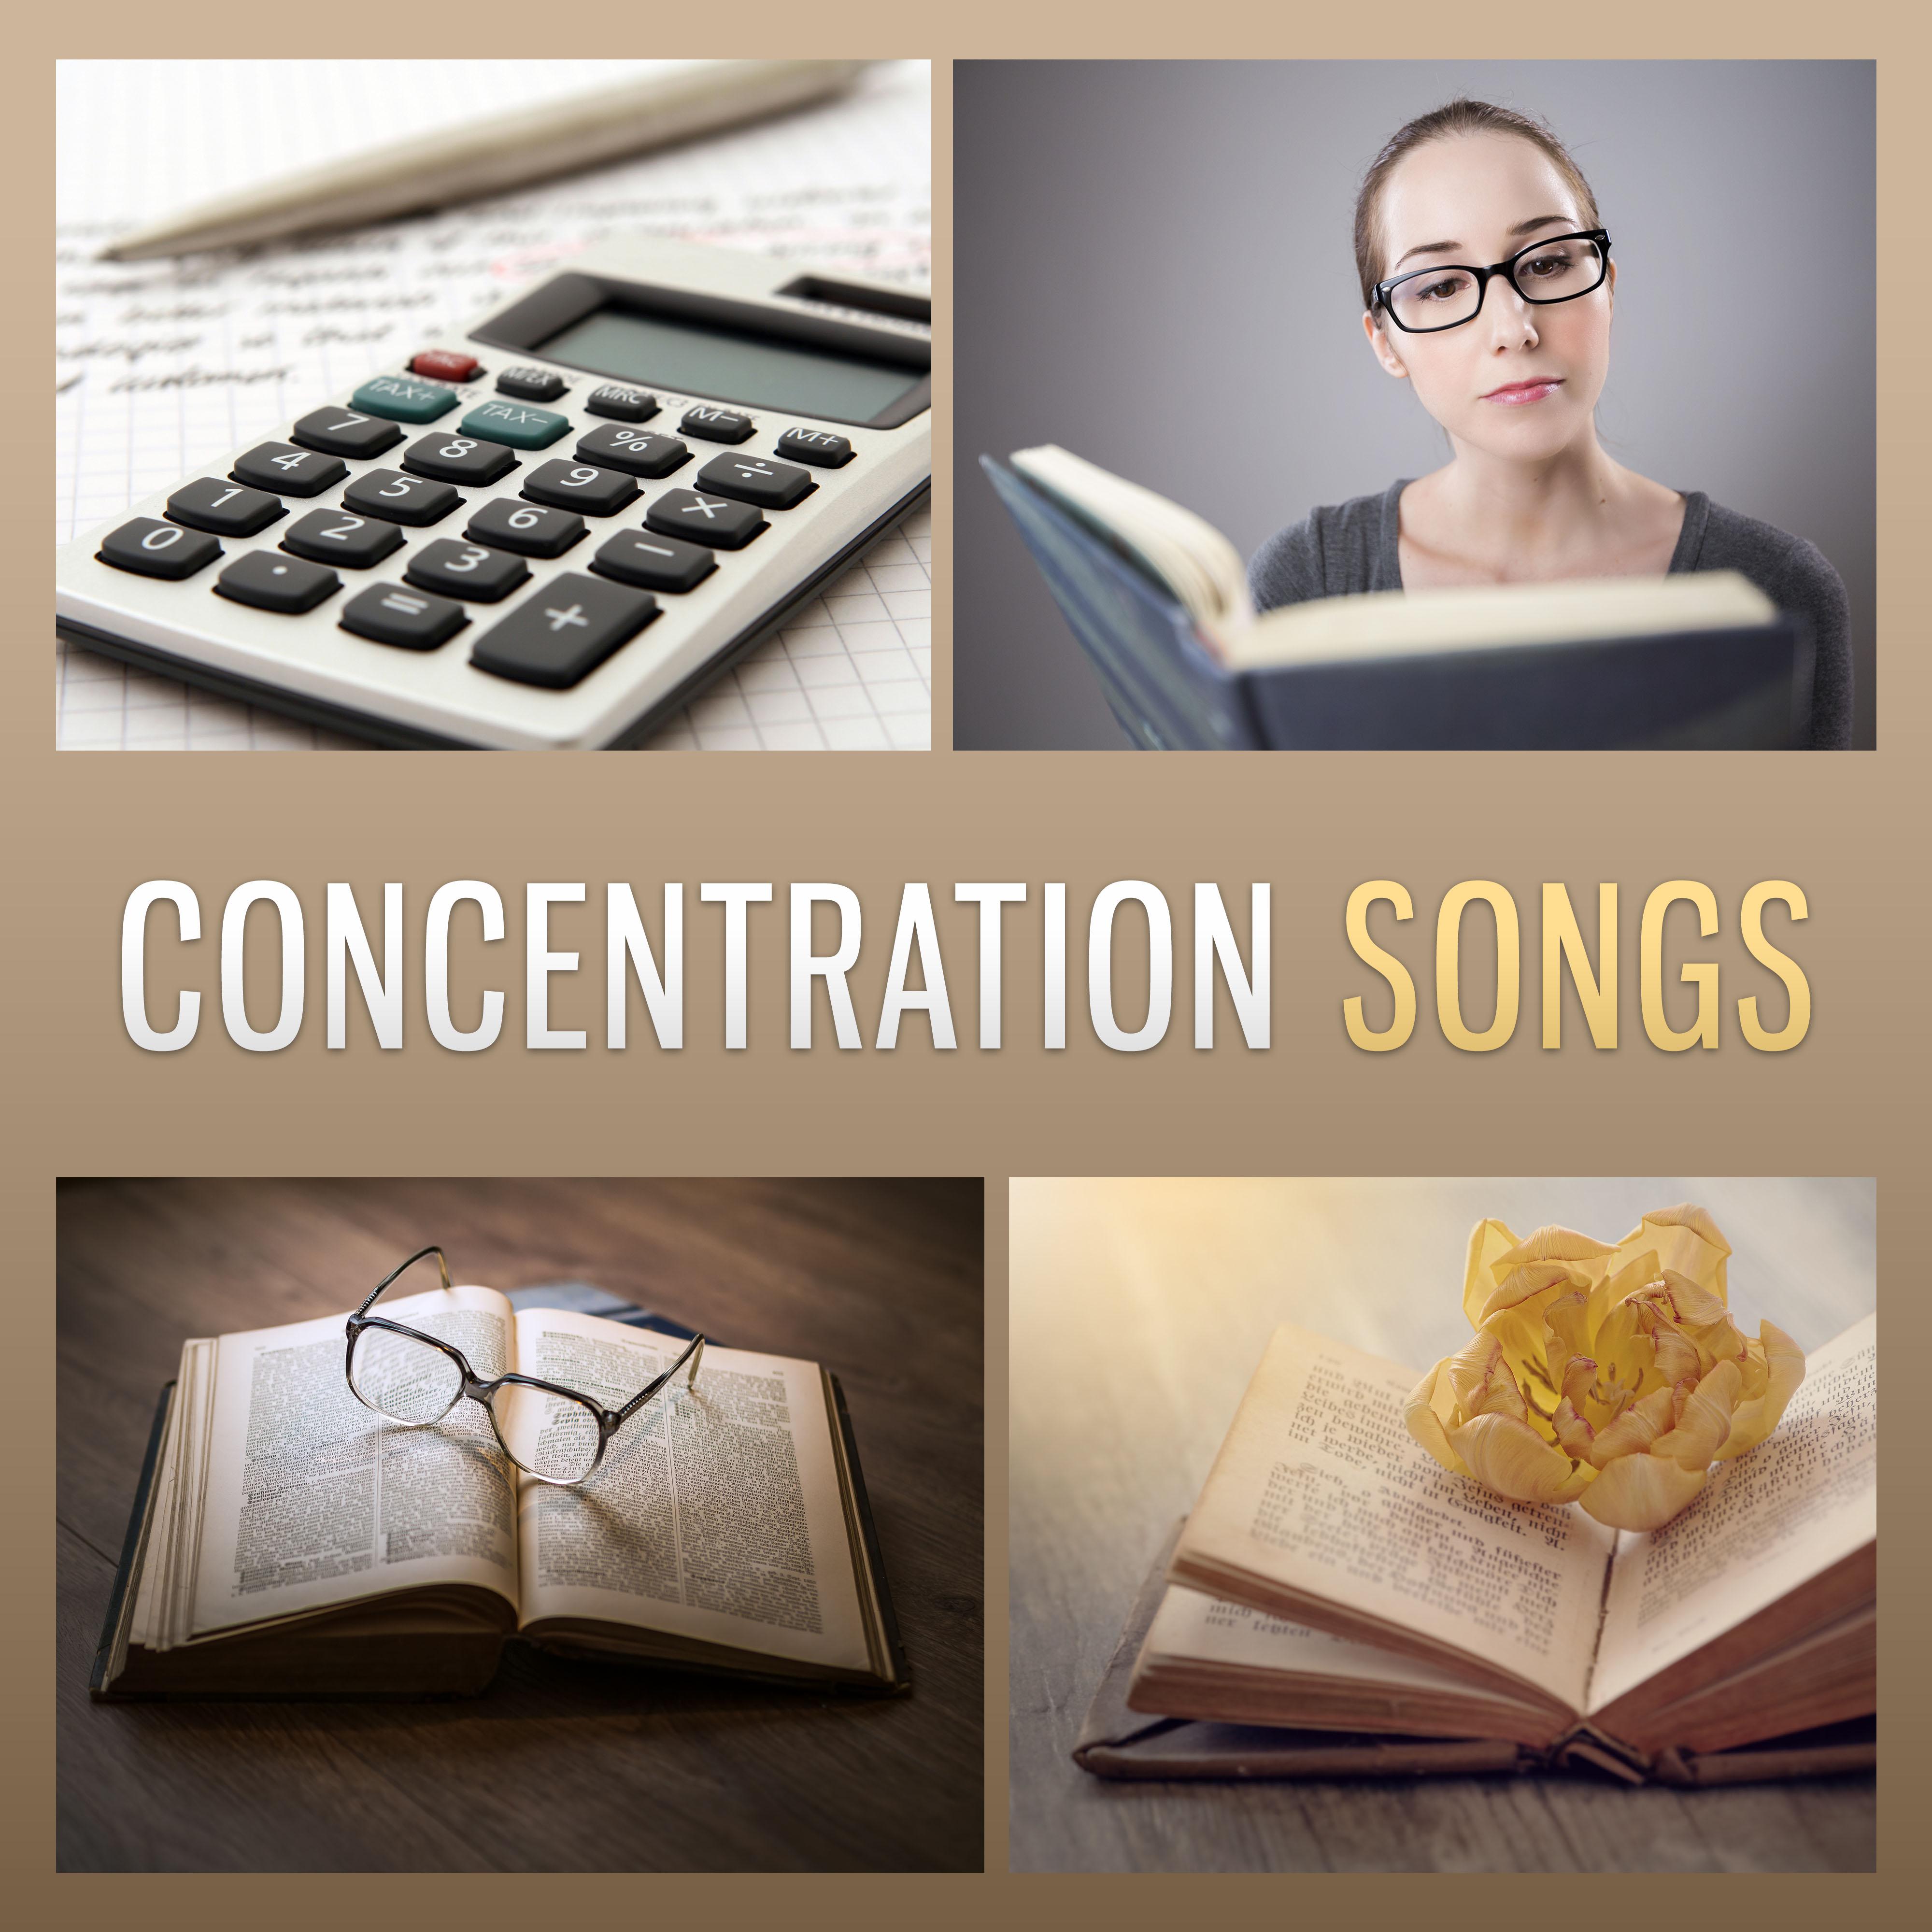 Concentration Songs – Classical Melodies to Study, Music for Listening, Learning, Music to Concentration, Bach to Intensive Learning